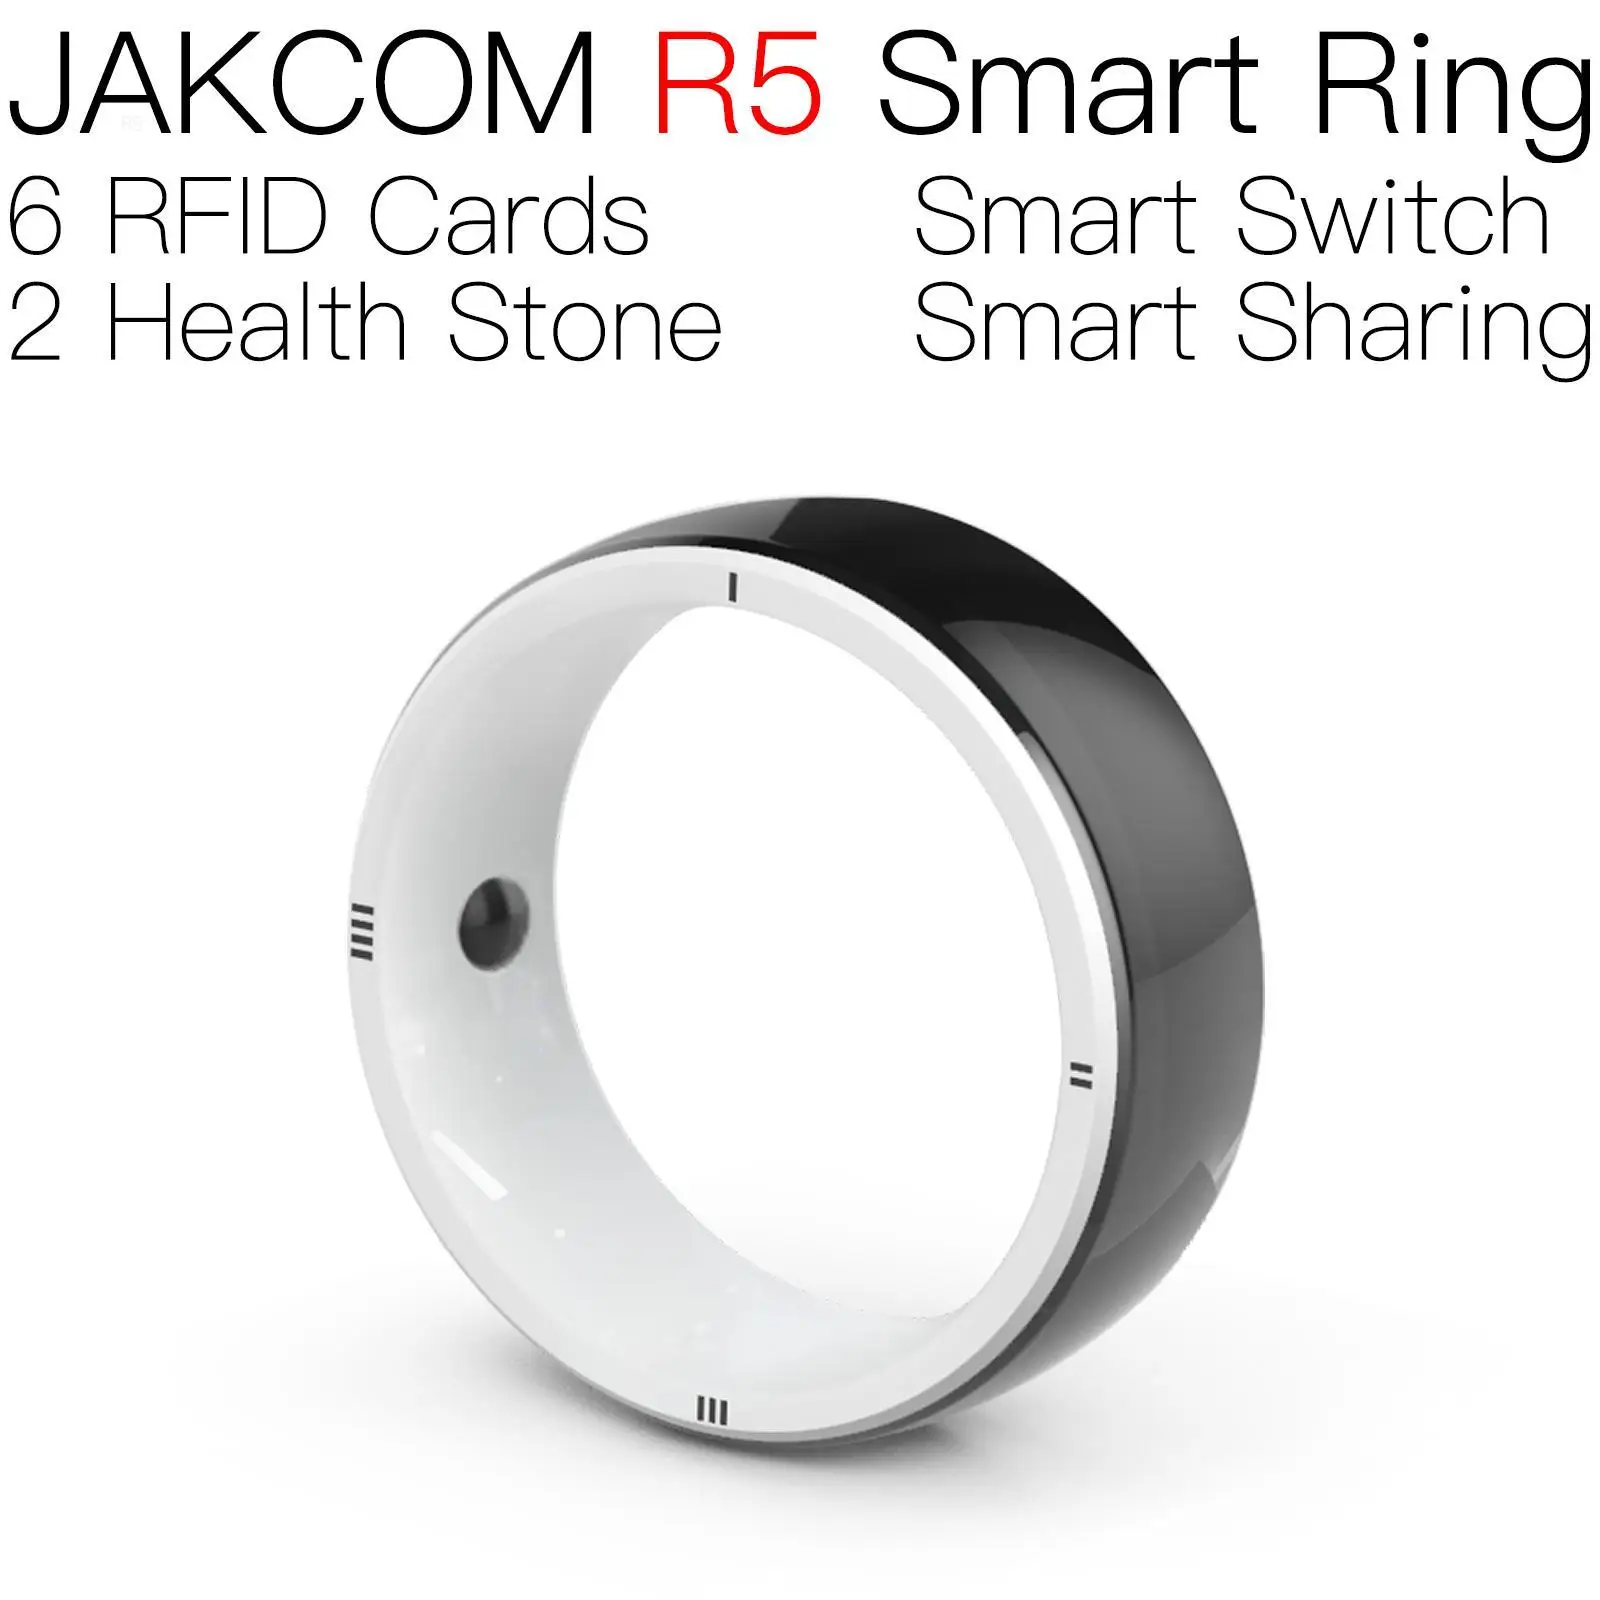 

JAKCOM R5 Smart Ring For men women usb to rs232 serial port 9 pin db9 cable nfc temperature card 232 rfid antenna 500pcs tag